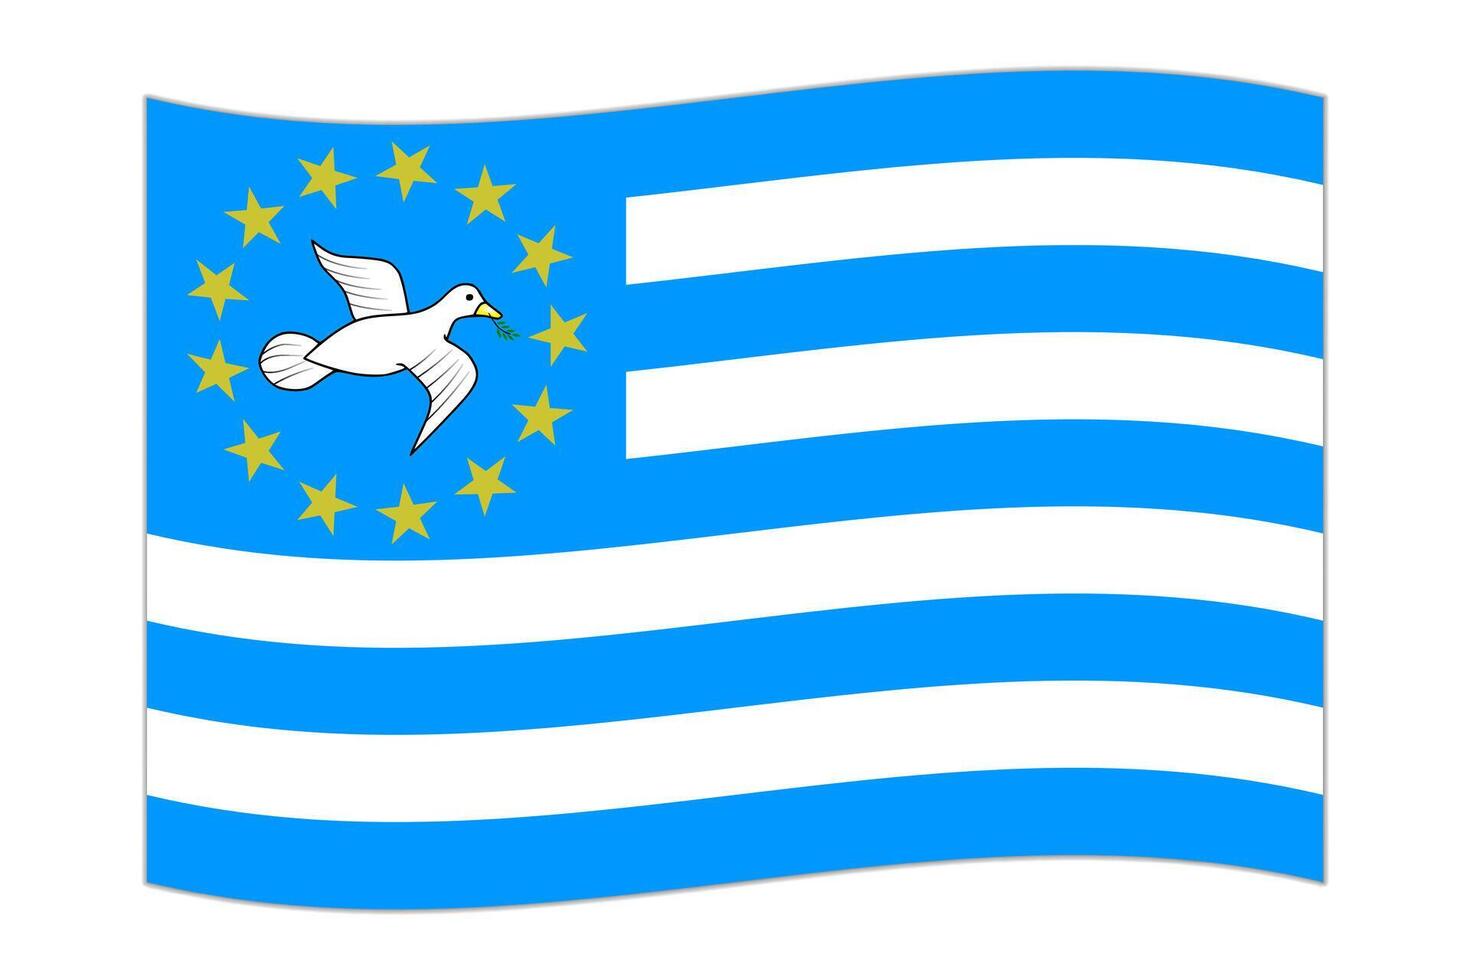 Waving flag of the country Federal Republic of Southern Cameroons. Vector illustration.